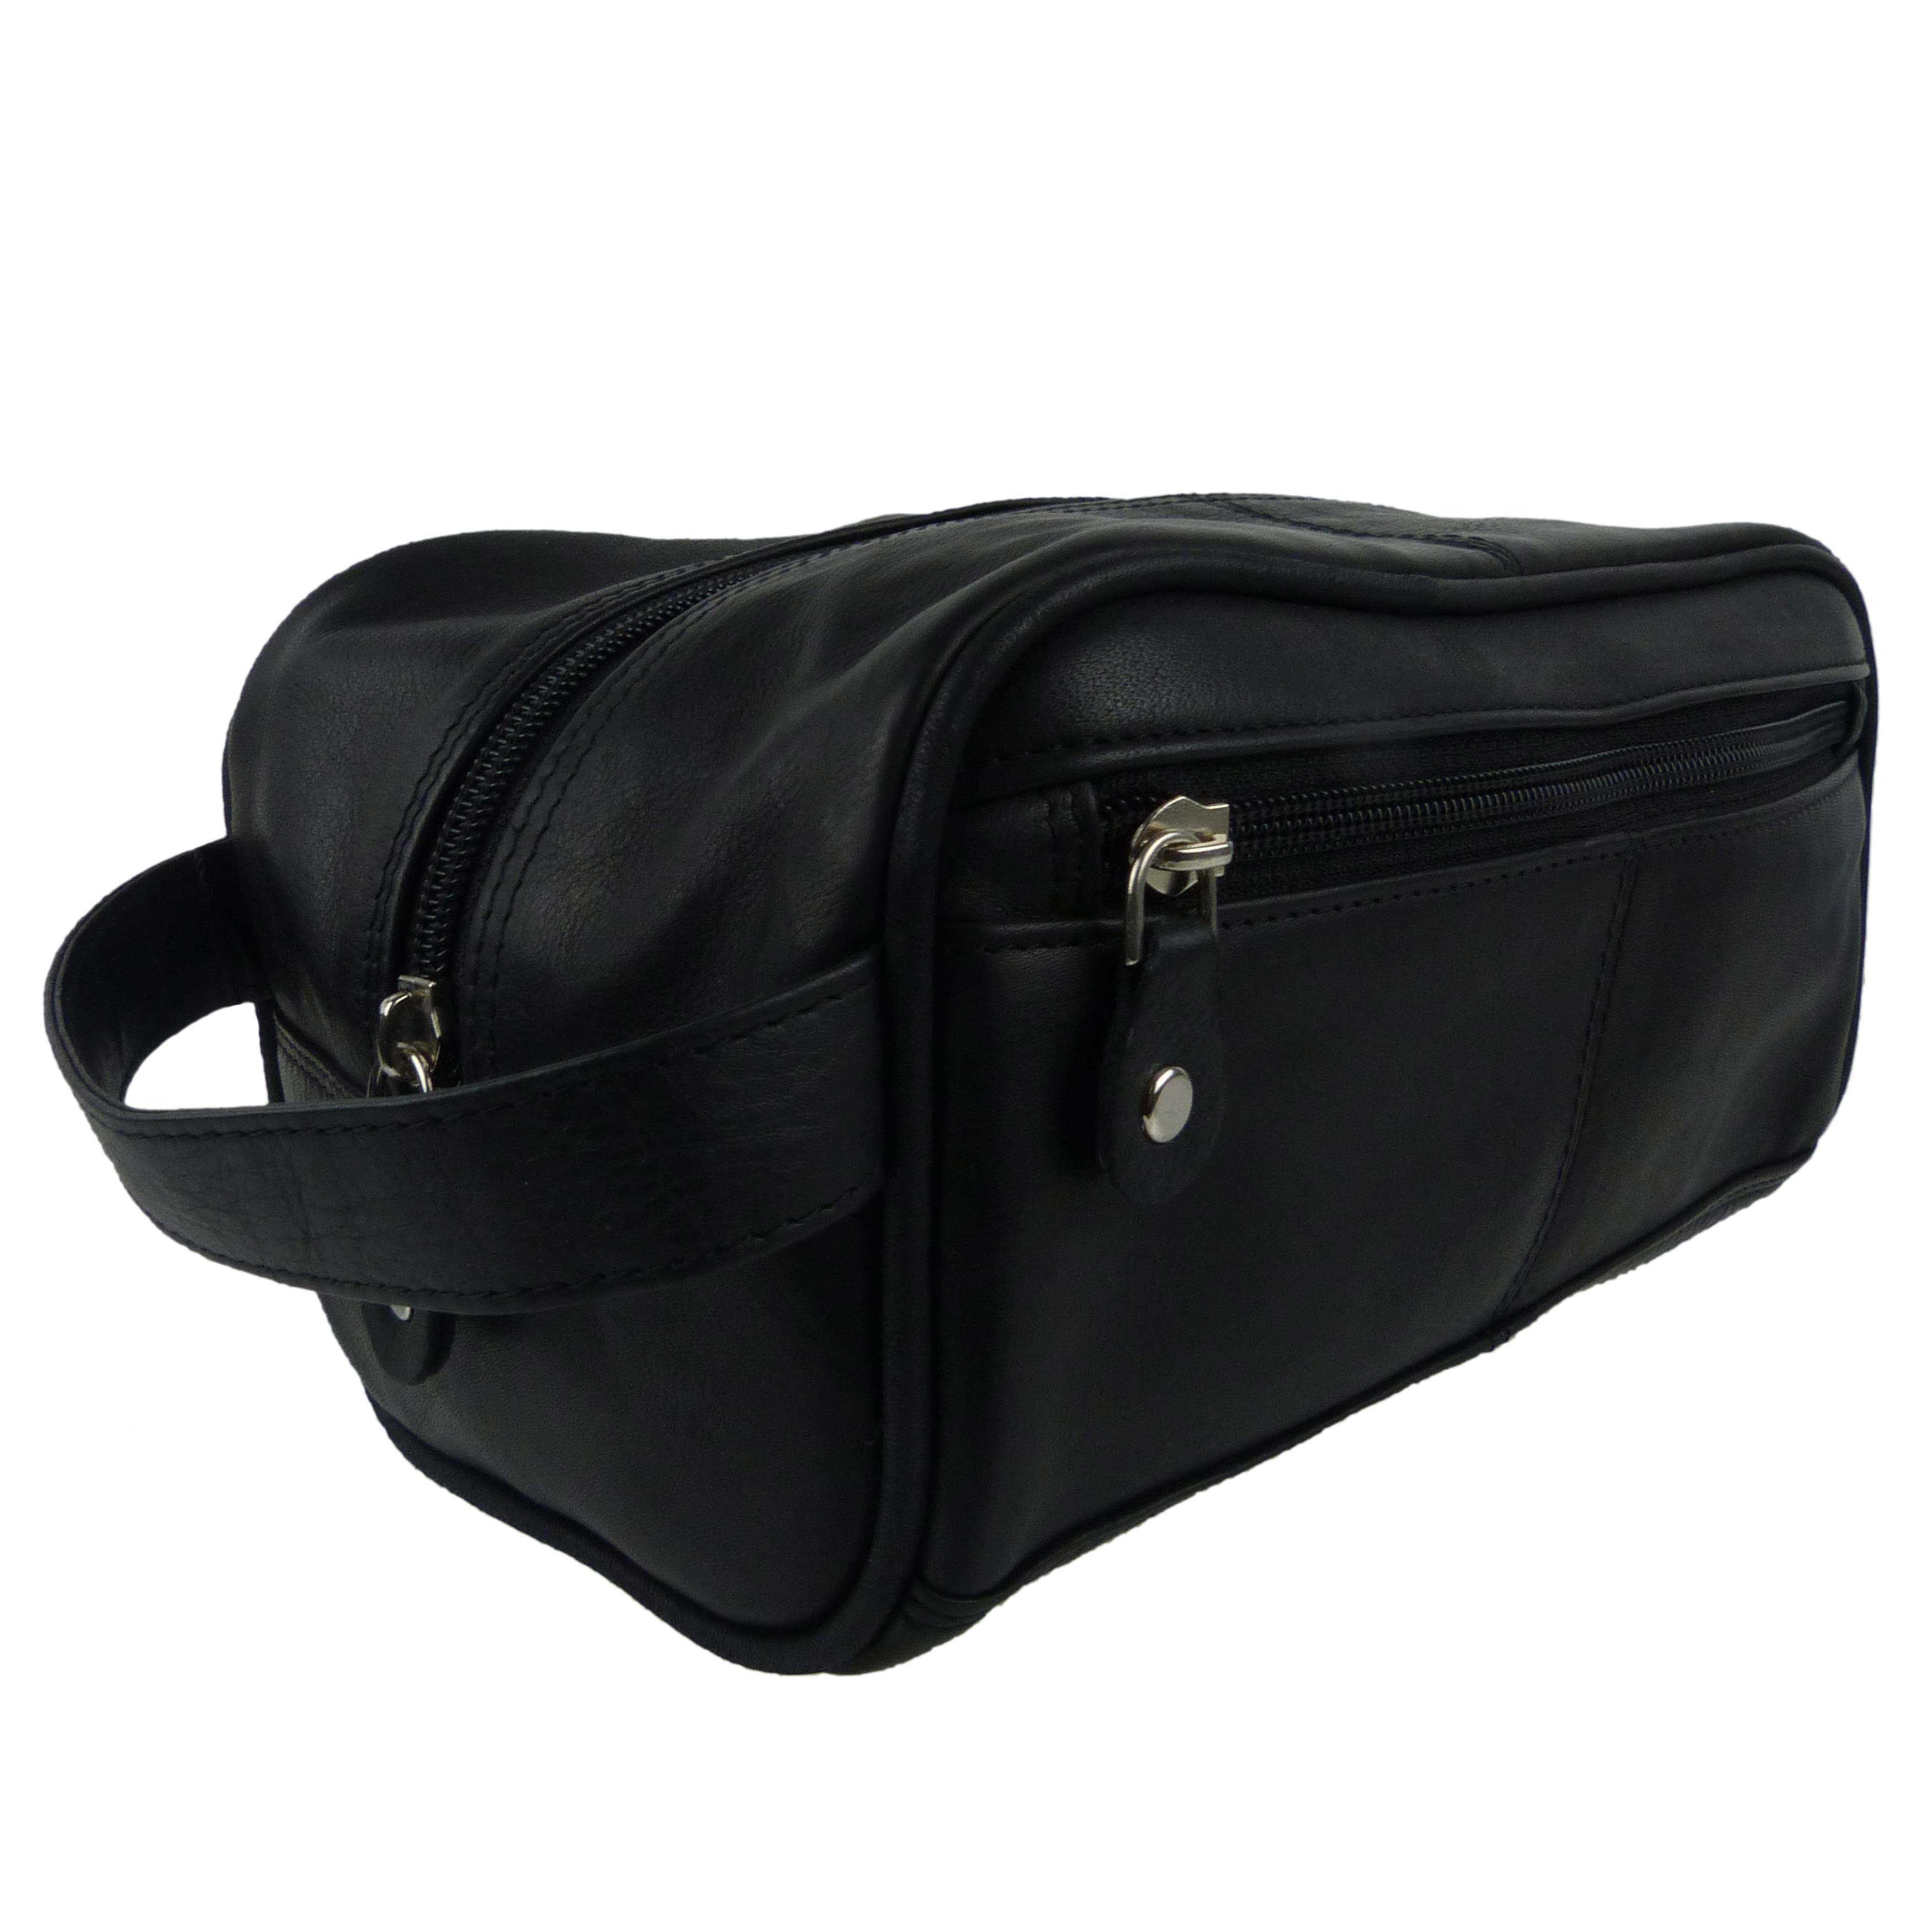 Mens Leather Small Wash Bag by Prime Hide Travel Toiletries Quality Black Handy | eBay